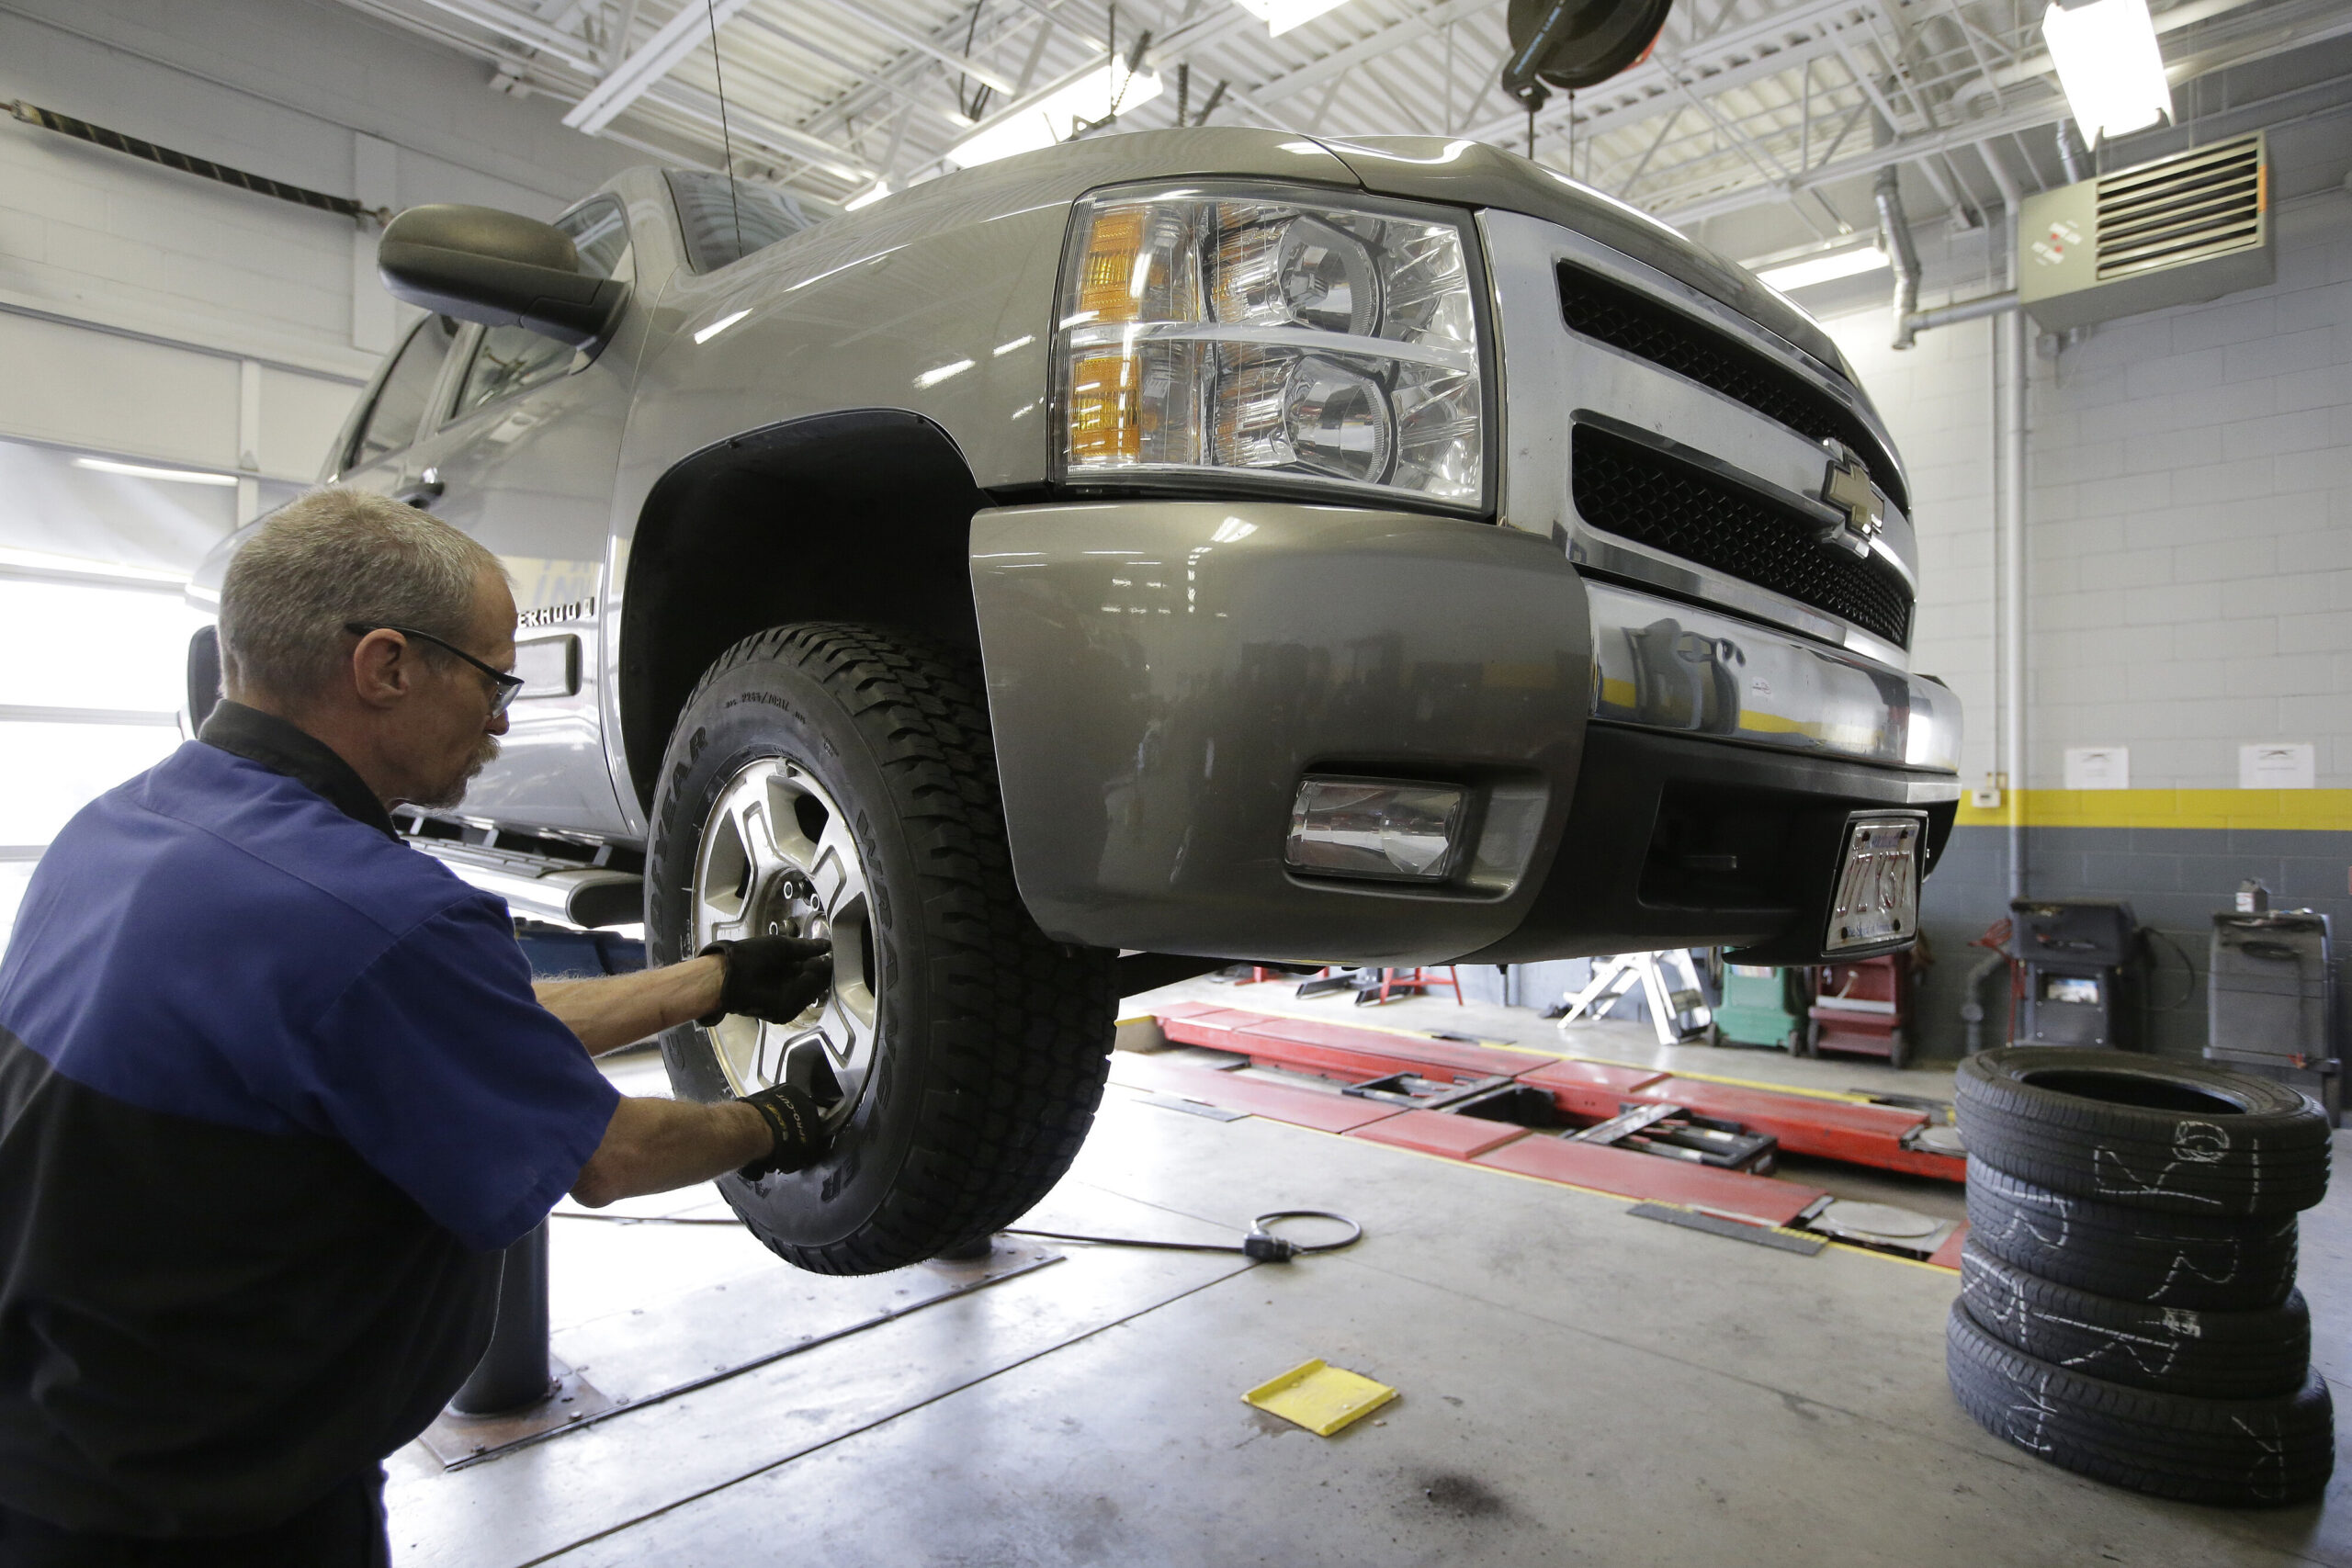 Maintenance technician Paul Bourque, of Everett, Mass., installs a wheel with a new tire on a vehicle at a Goodyear Auto Service Center